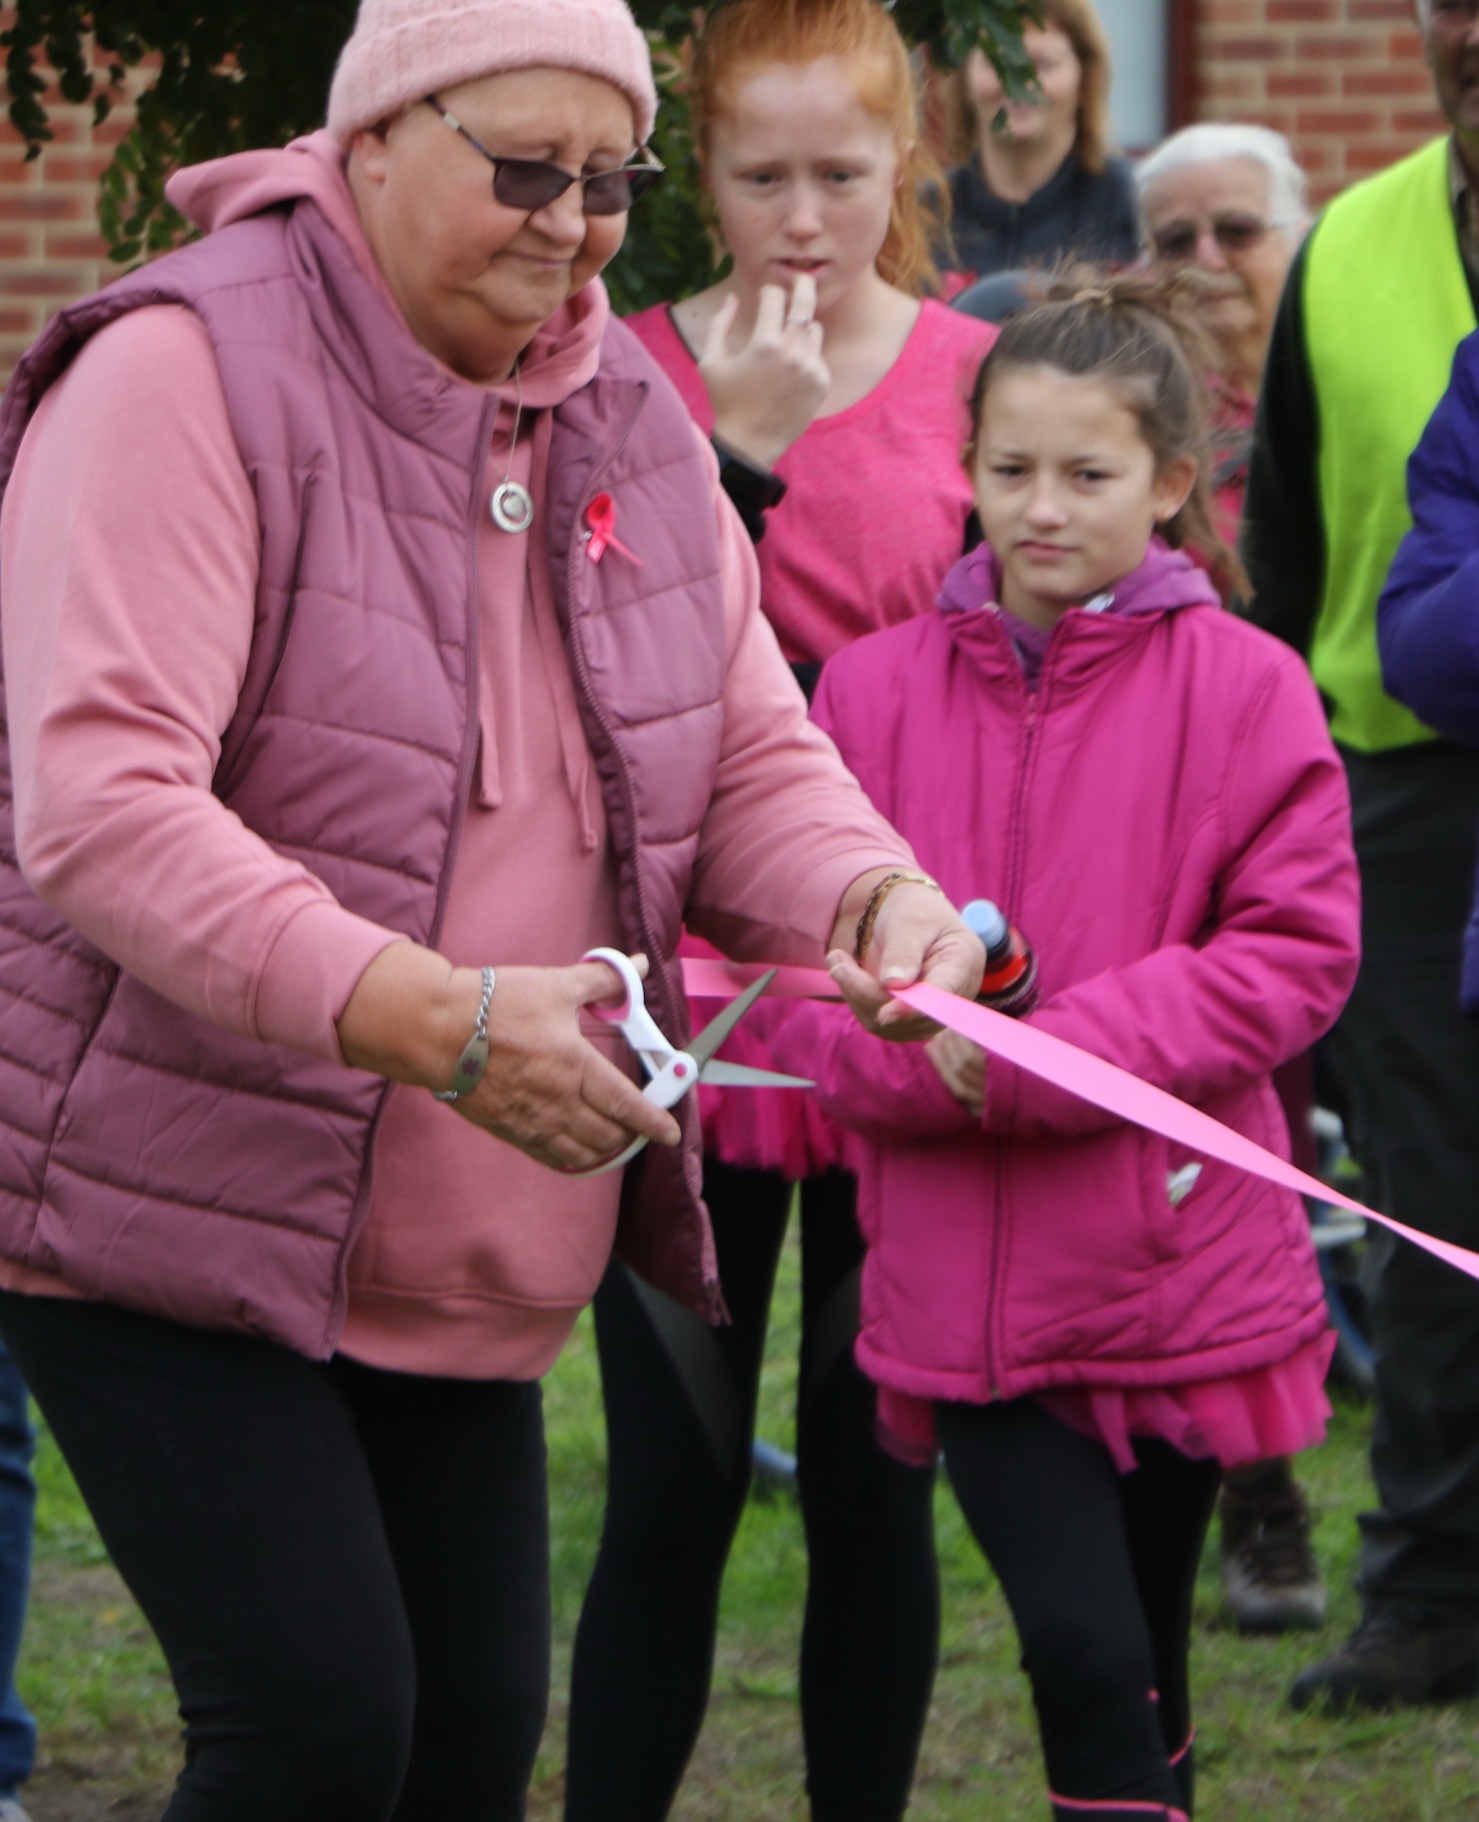 Breast Cancer survivor cuts ribbon to start Mother's Day Mother's Day Classic Traralgon/ Toongabbie